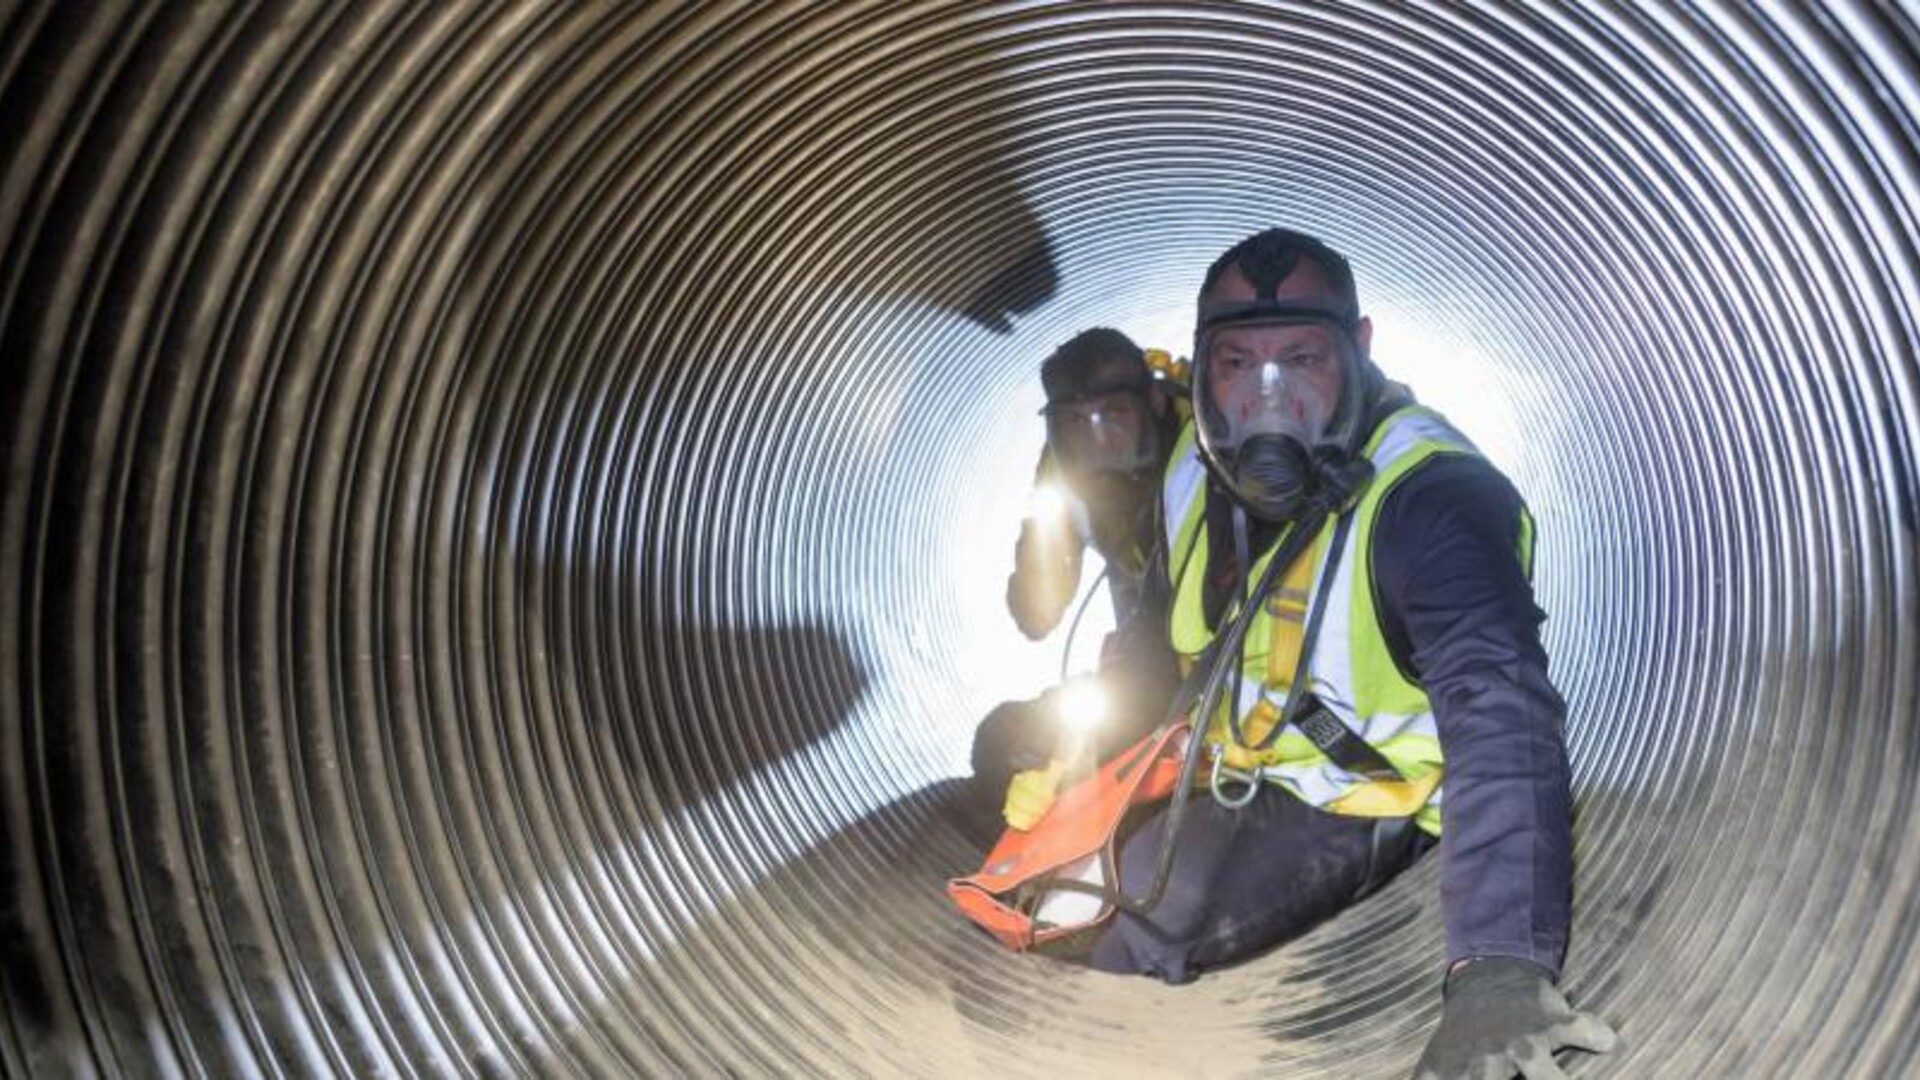 Preventing Confined Space Tragedies